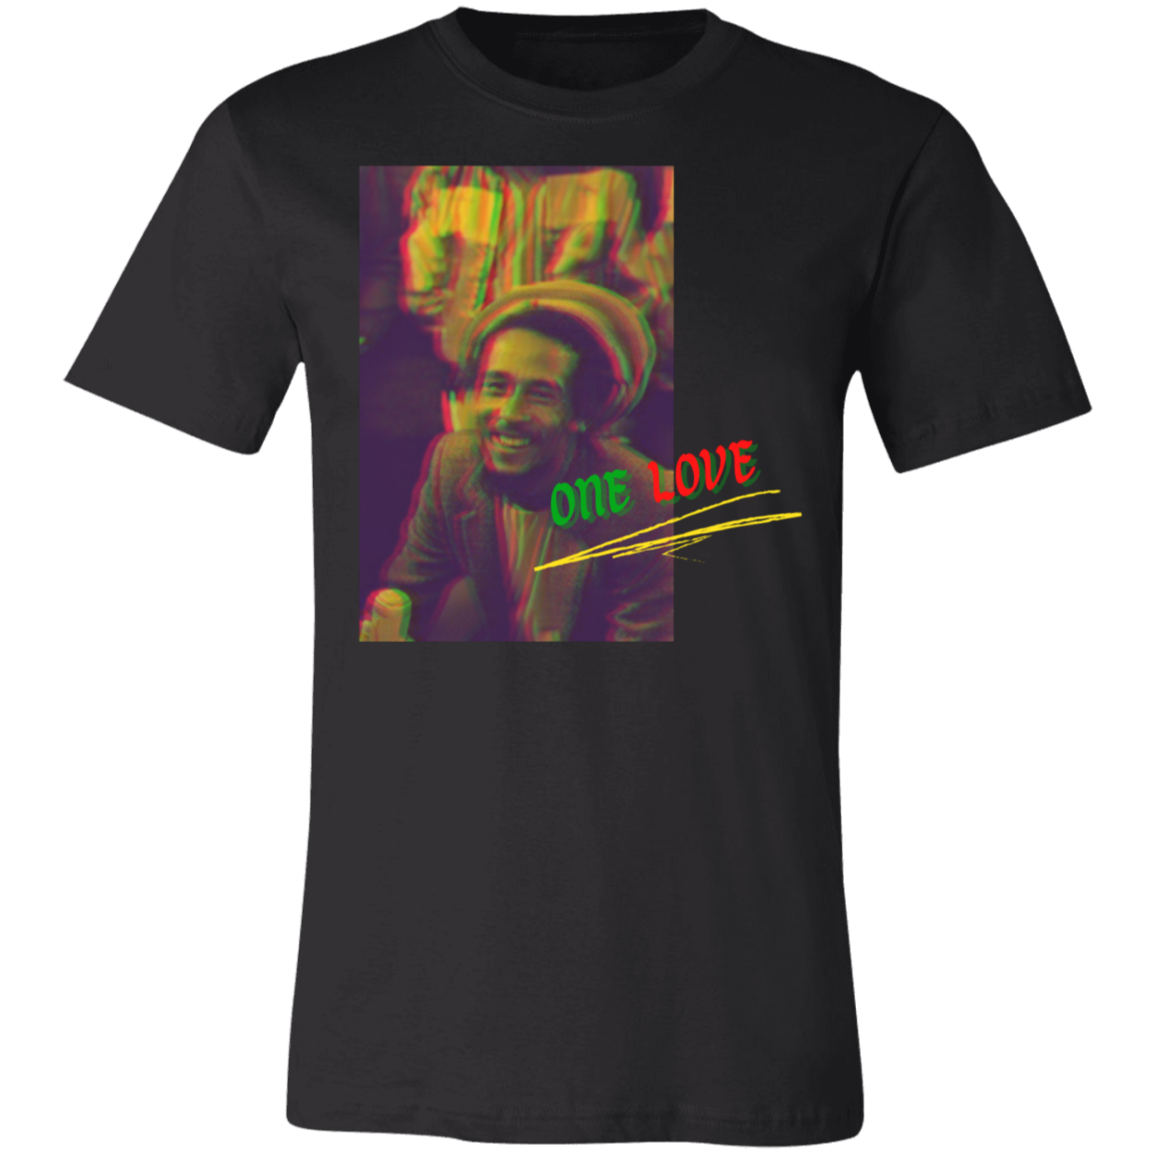 bob marley graphic tee in black, it reads "one love"